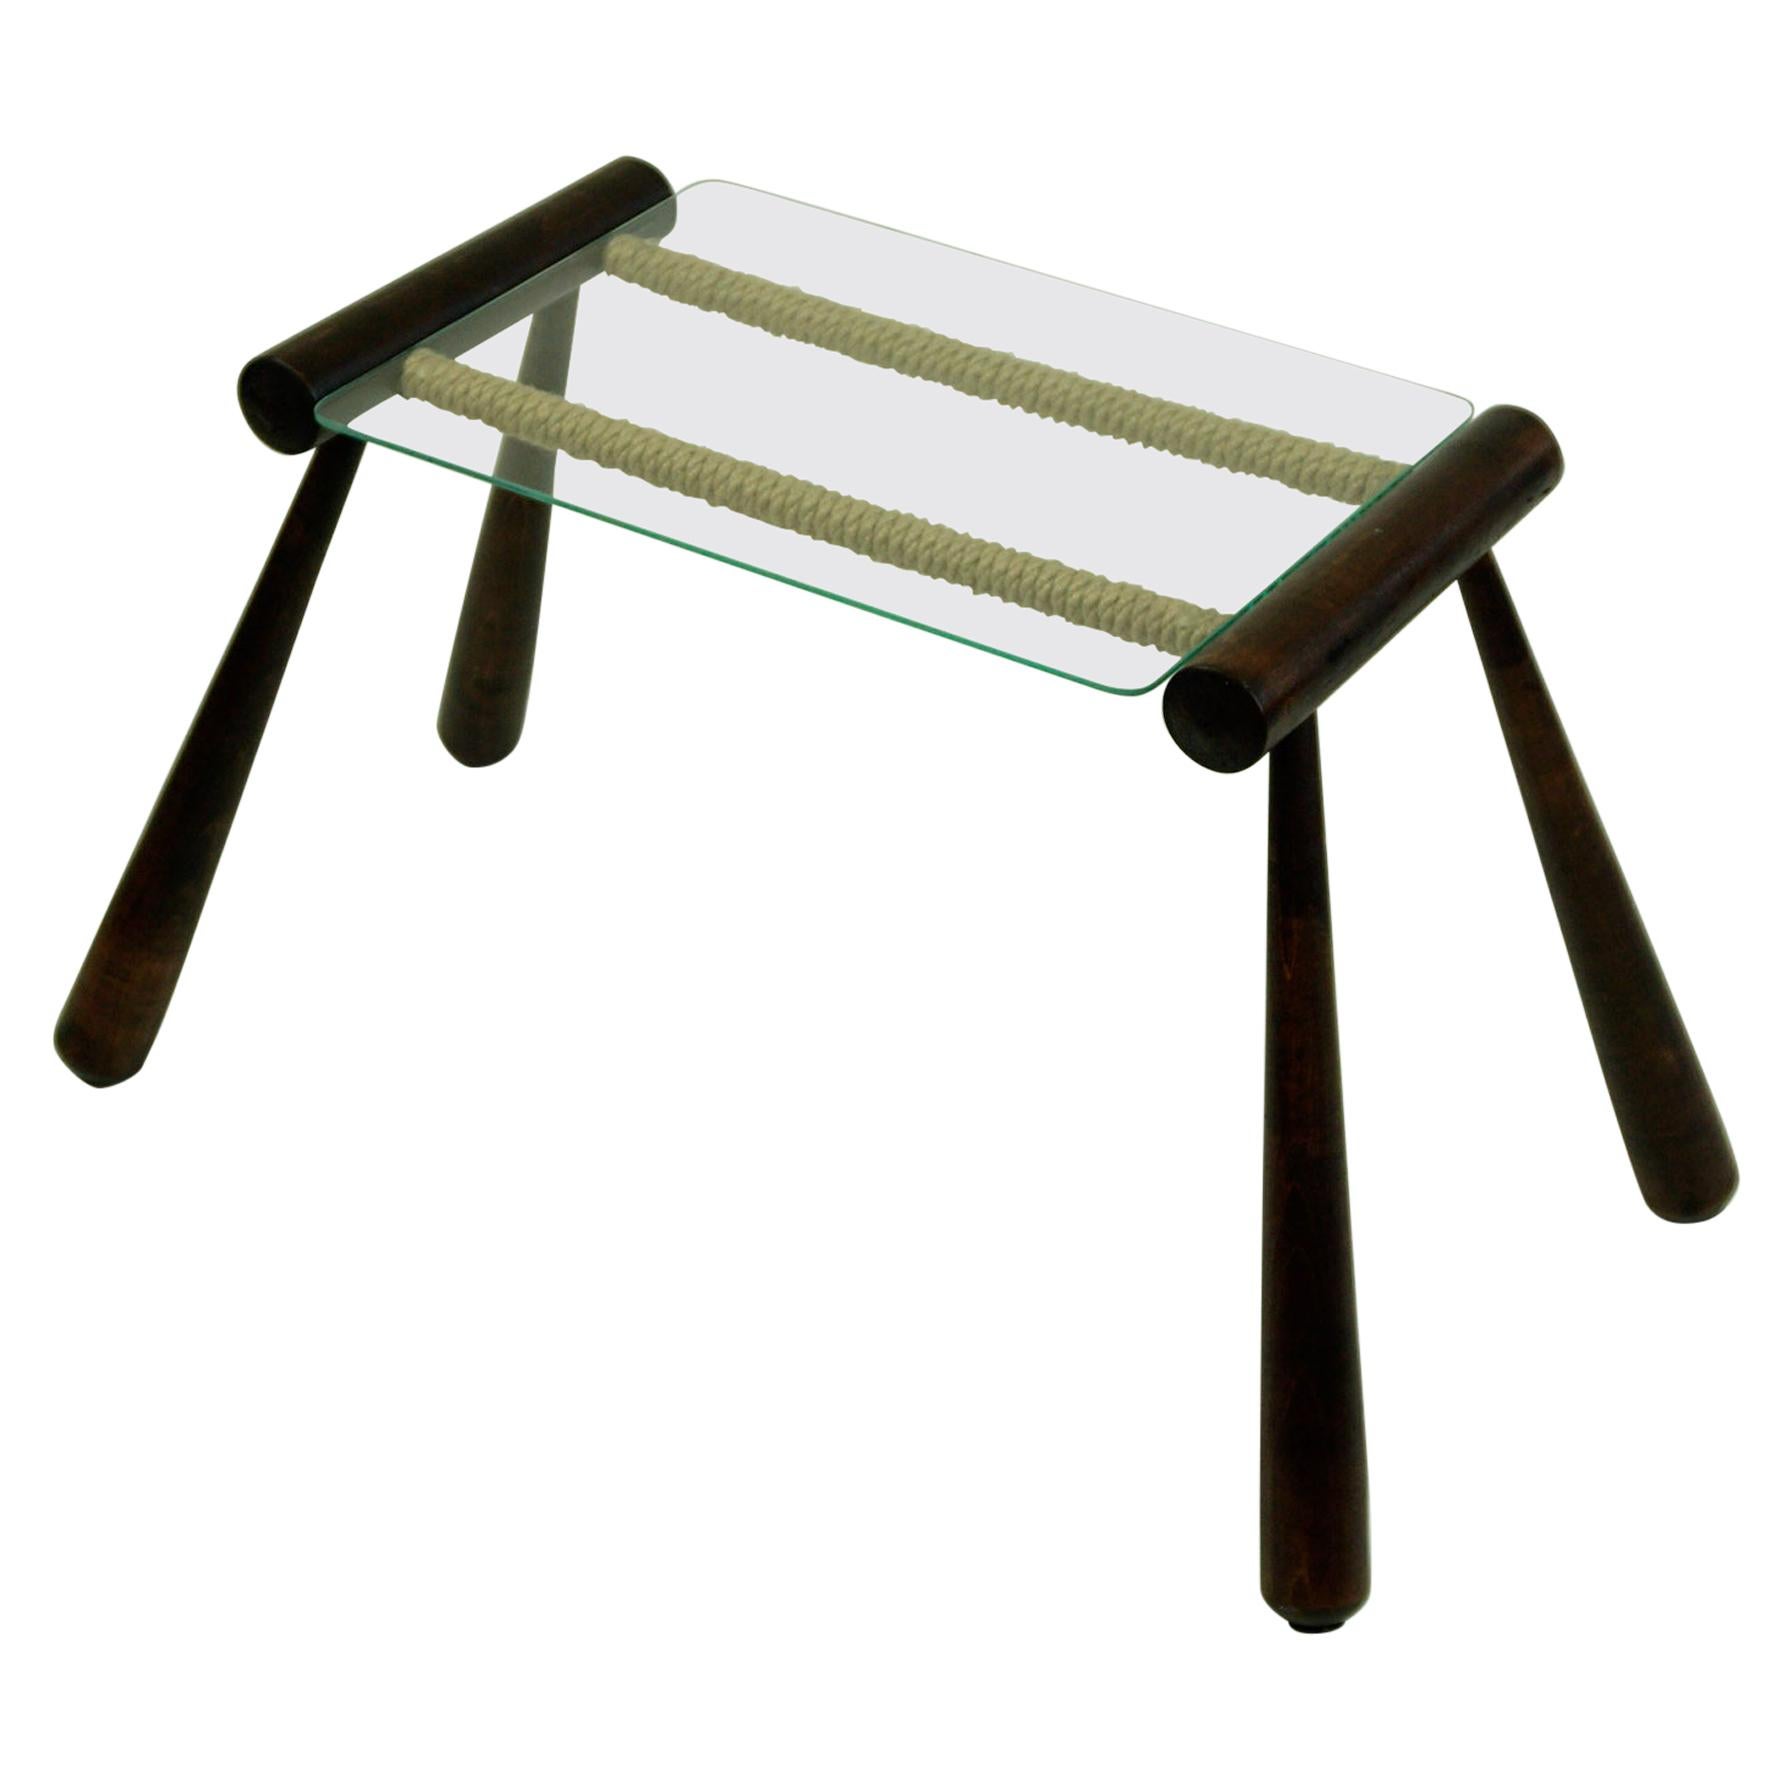 Austrian Midcentury Wooden Side Table with Cord and Glass Top by Max Kment